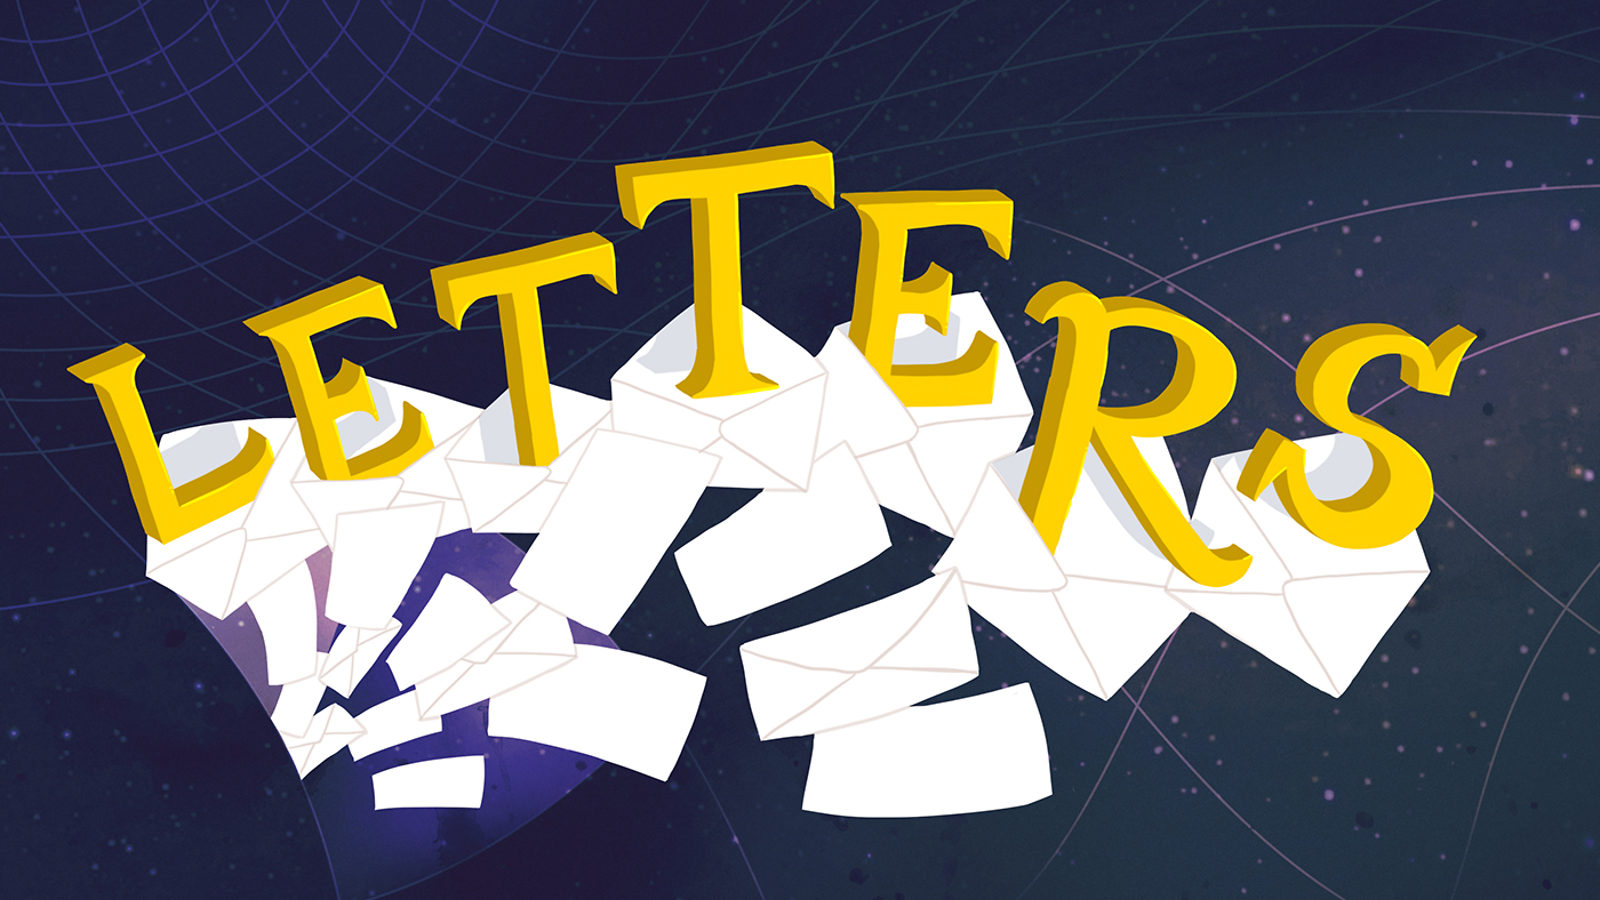 Illustration of grid in space where papers are spelling out "letters"